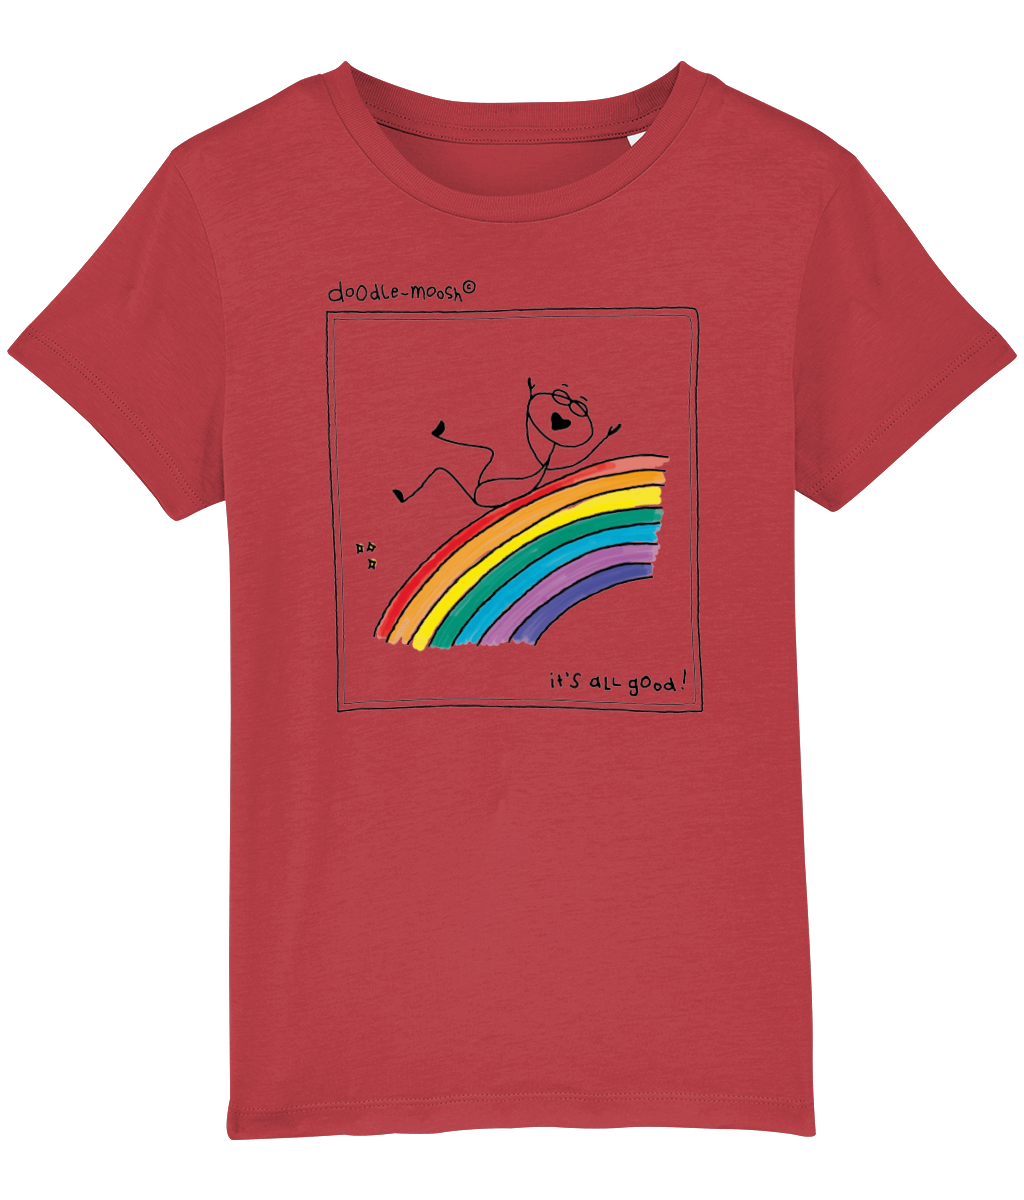 it's all good t-shirt, red with black, colored rainbow